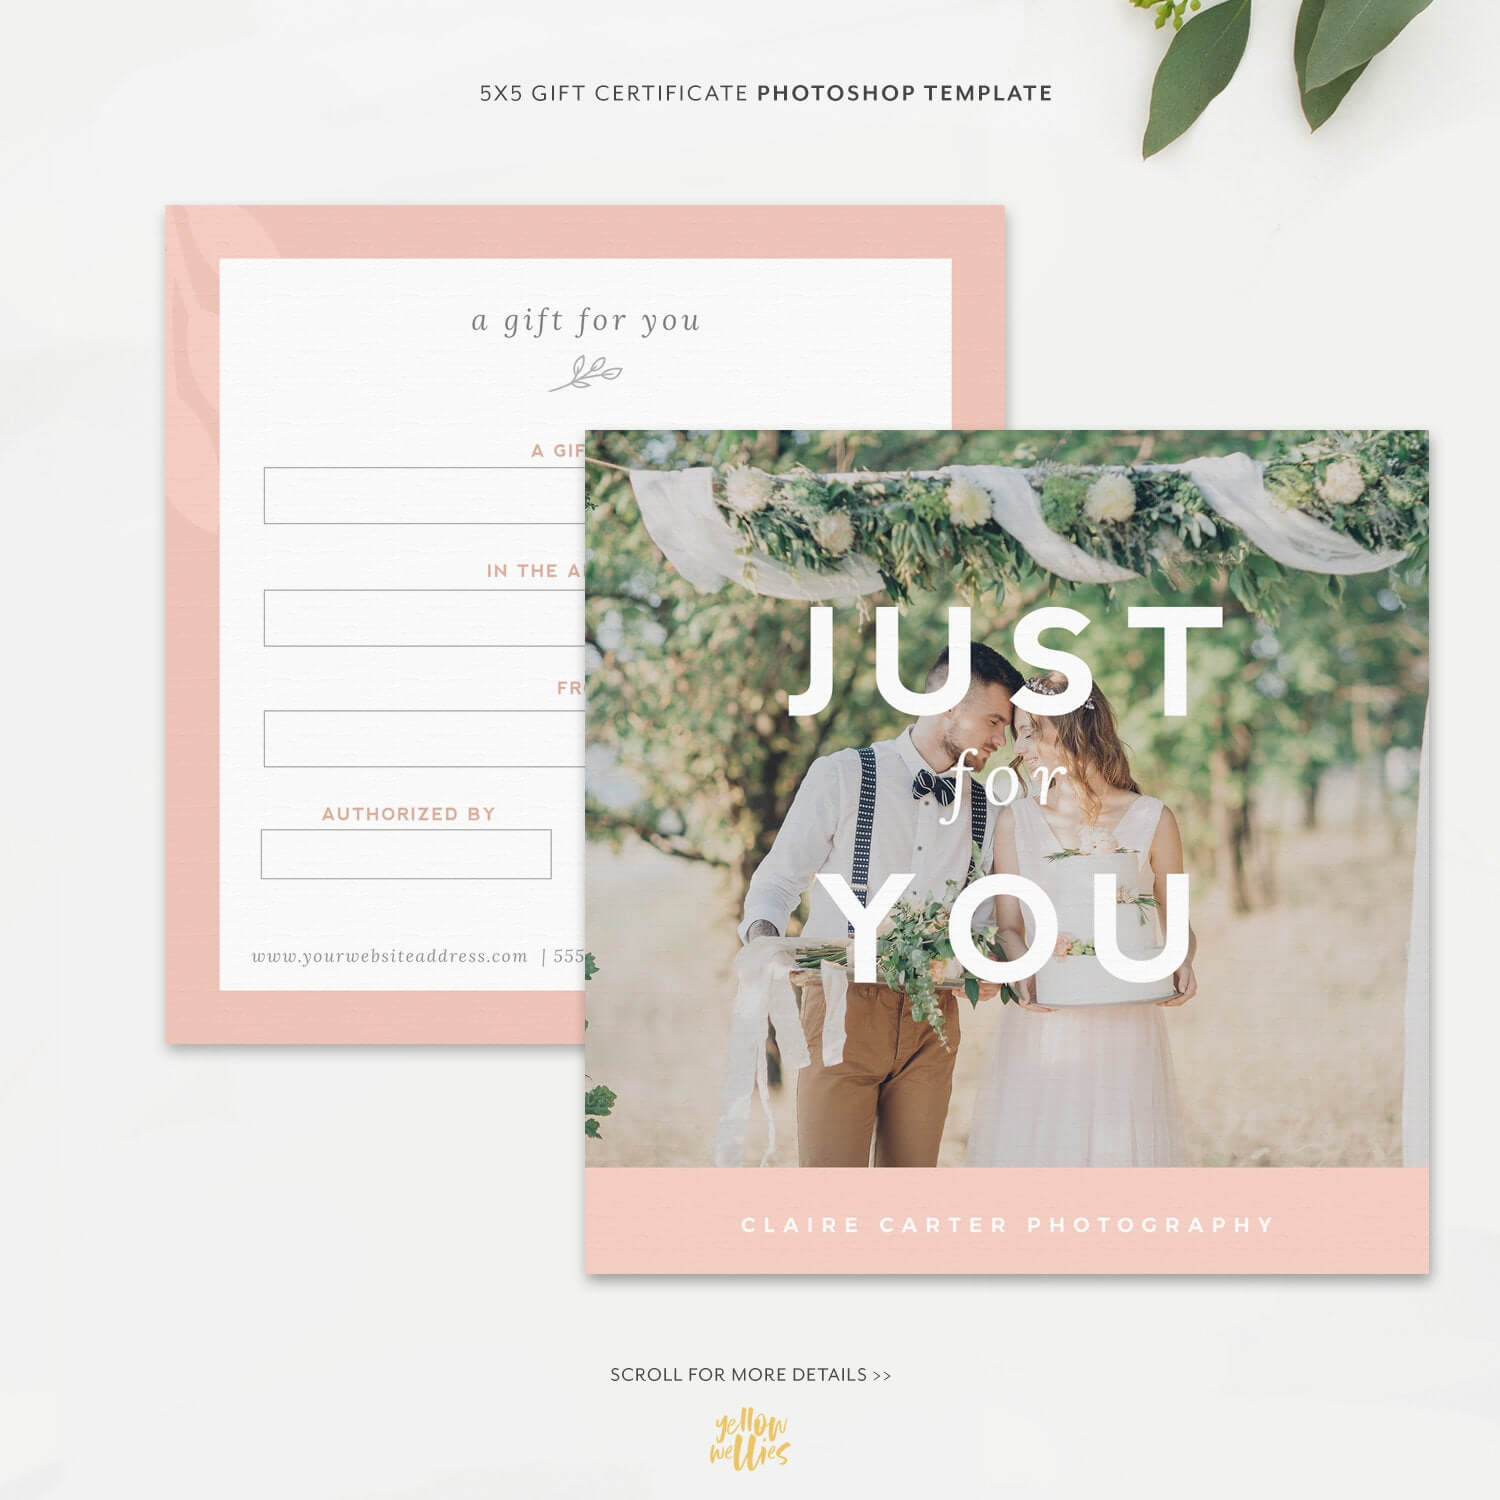 Gift Certificate Template For Photographers Or Small Businesses | Gift Card  Photoshop Template | Marketing Template Throughout Small Certificate Template